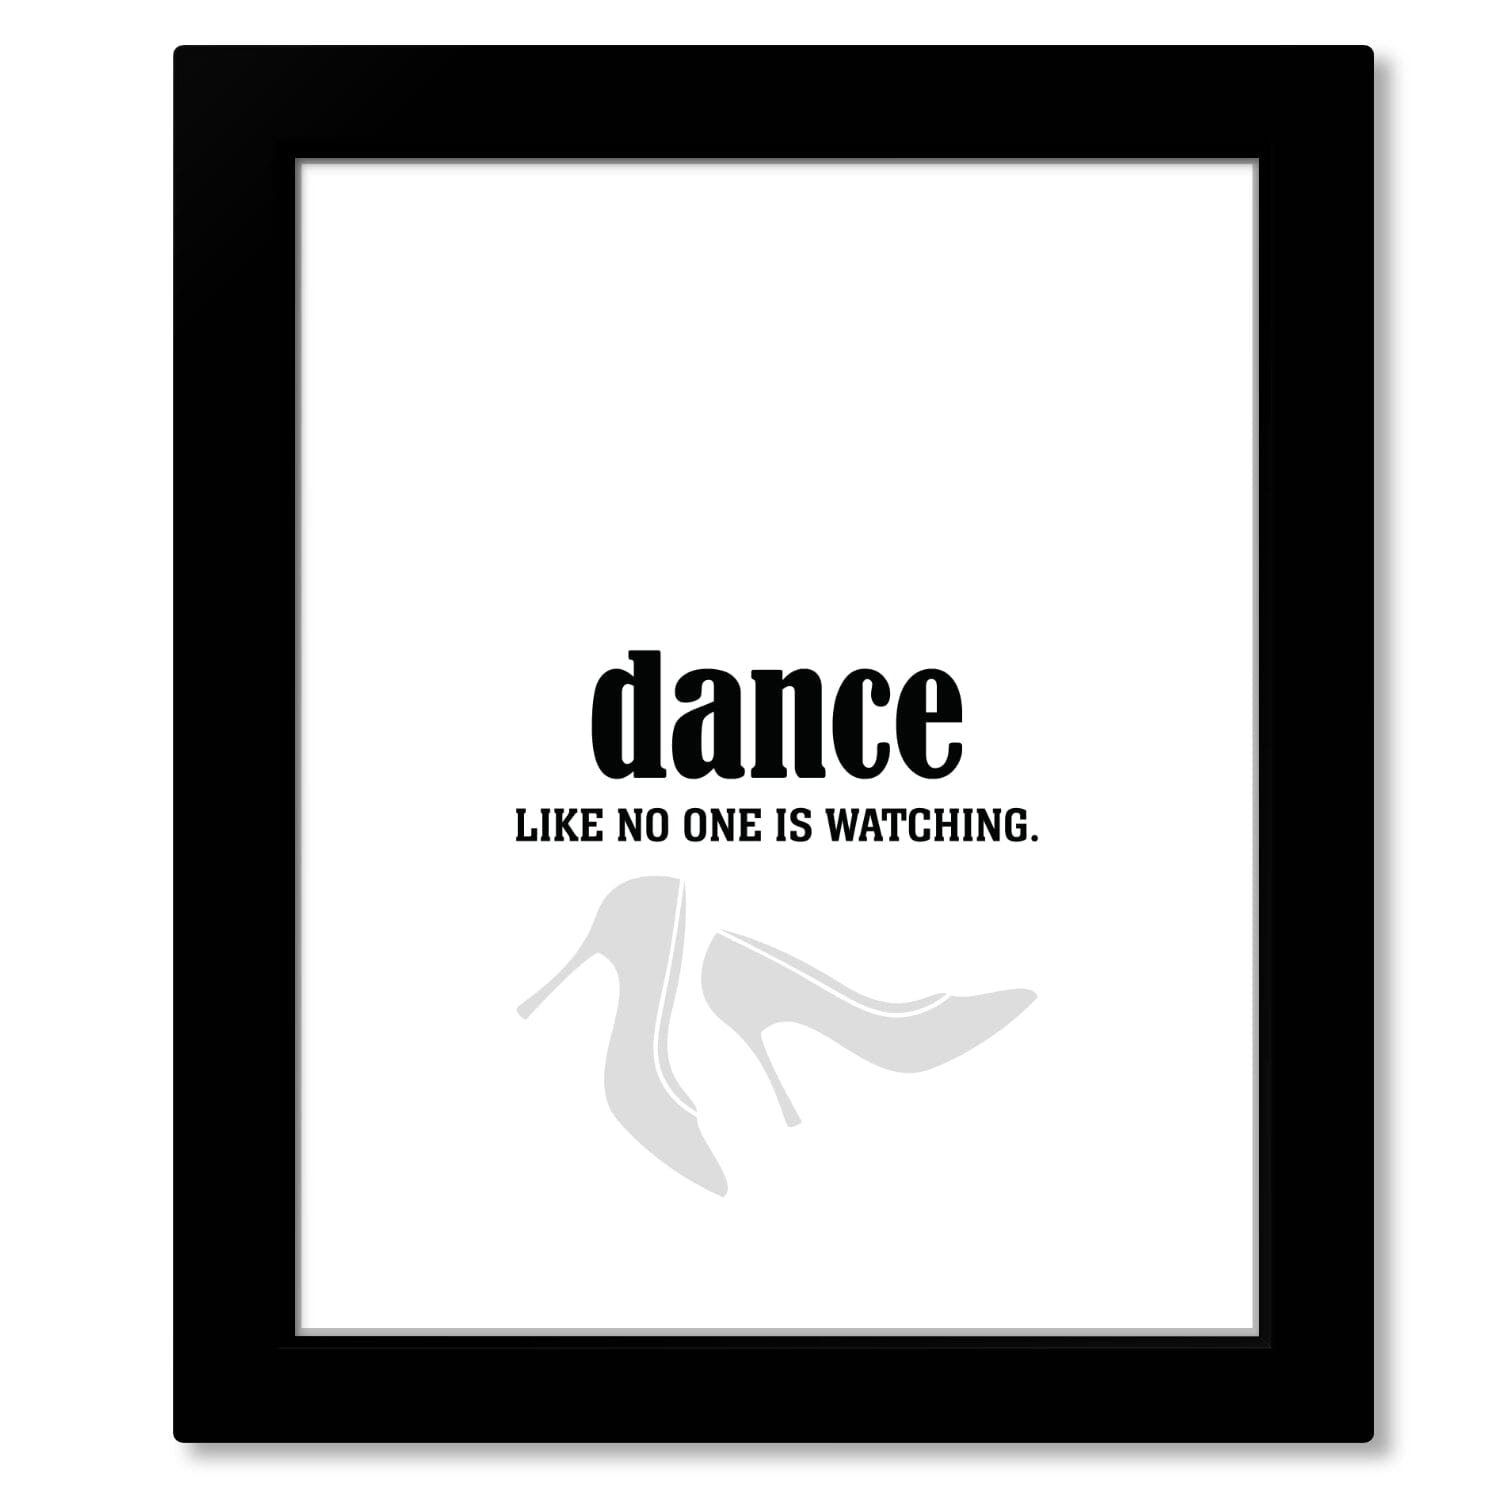 Dance Like No One is Watching - Wise and Witty Art Print Wise and Wiseass Quotes Song Lyrics Art 8x10 Framed Print 